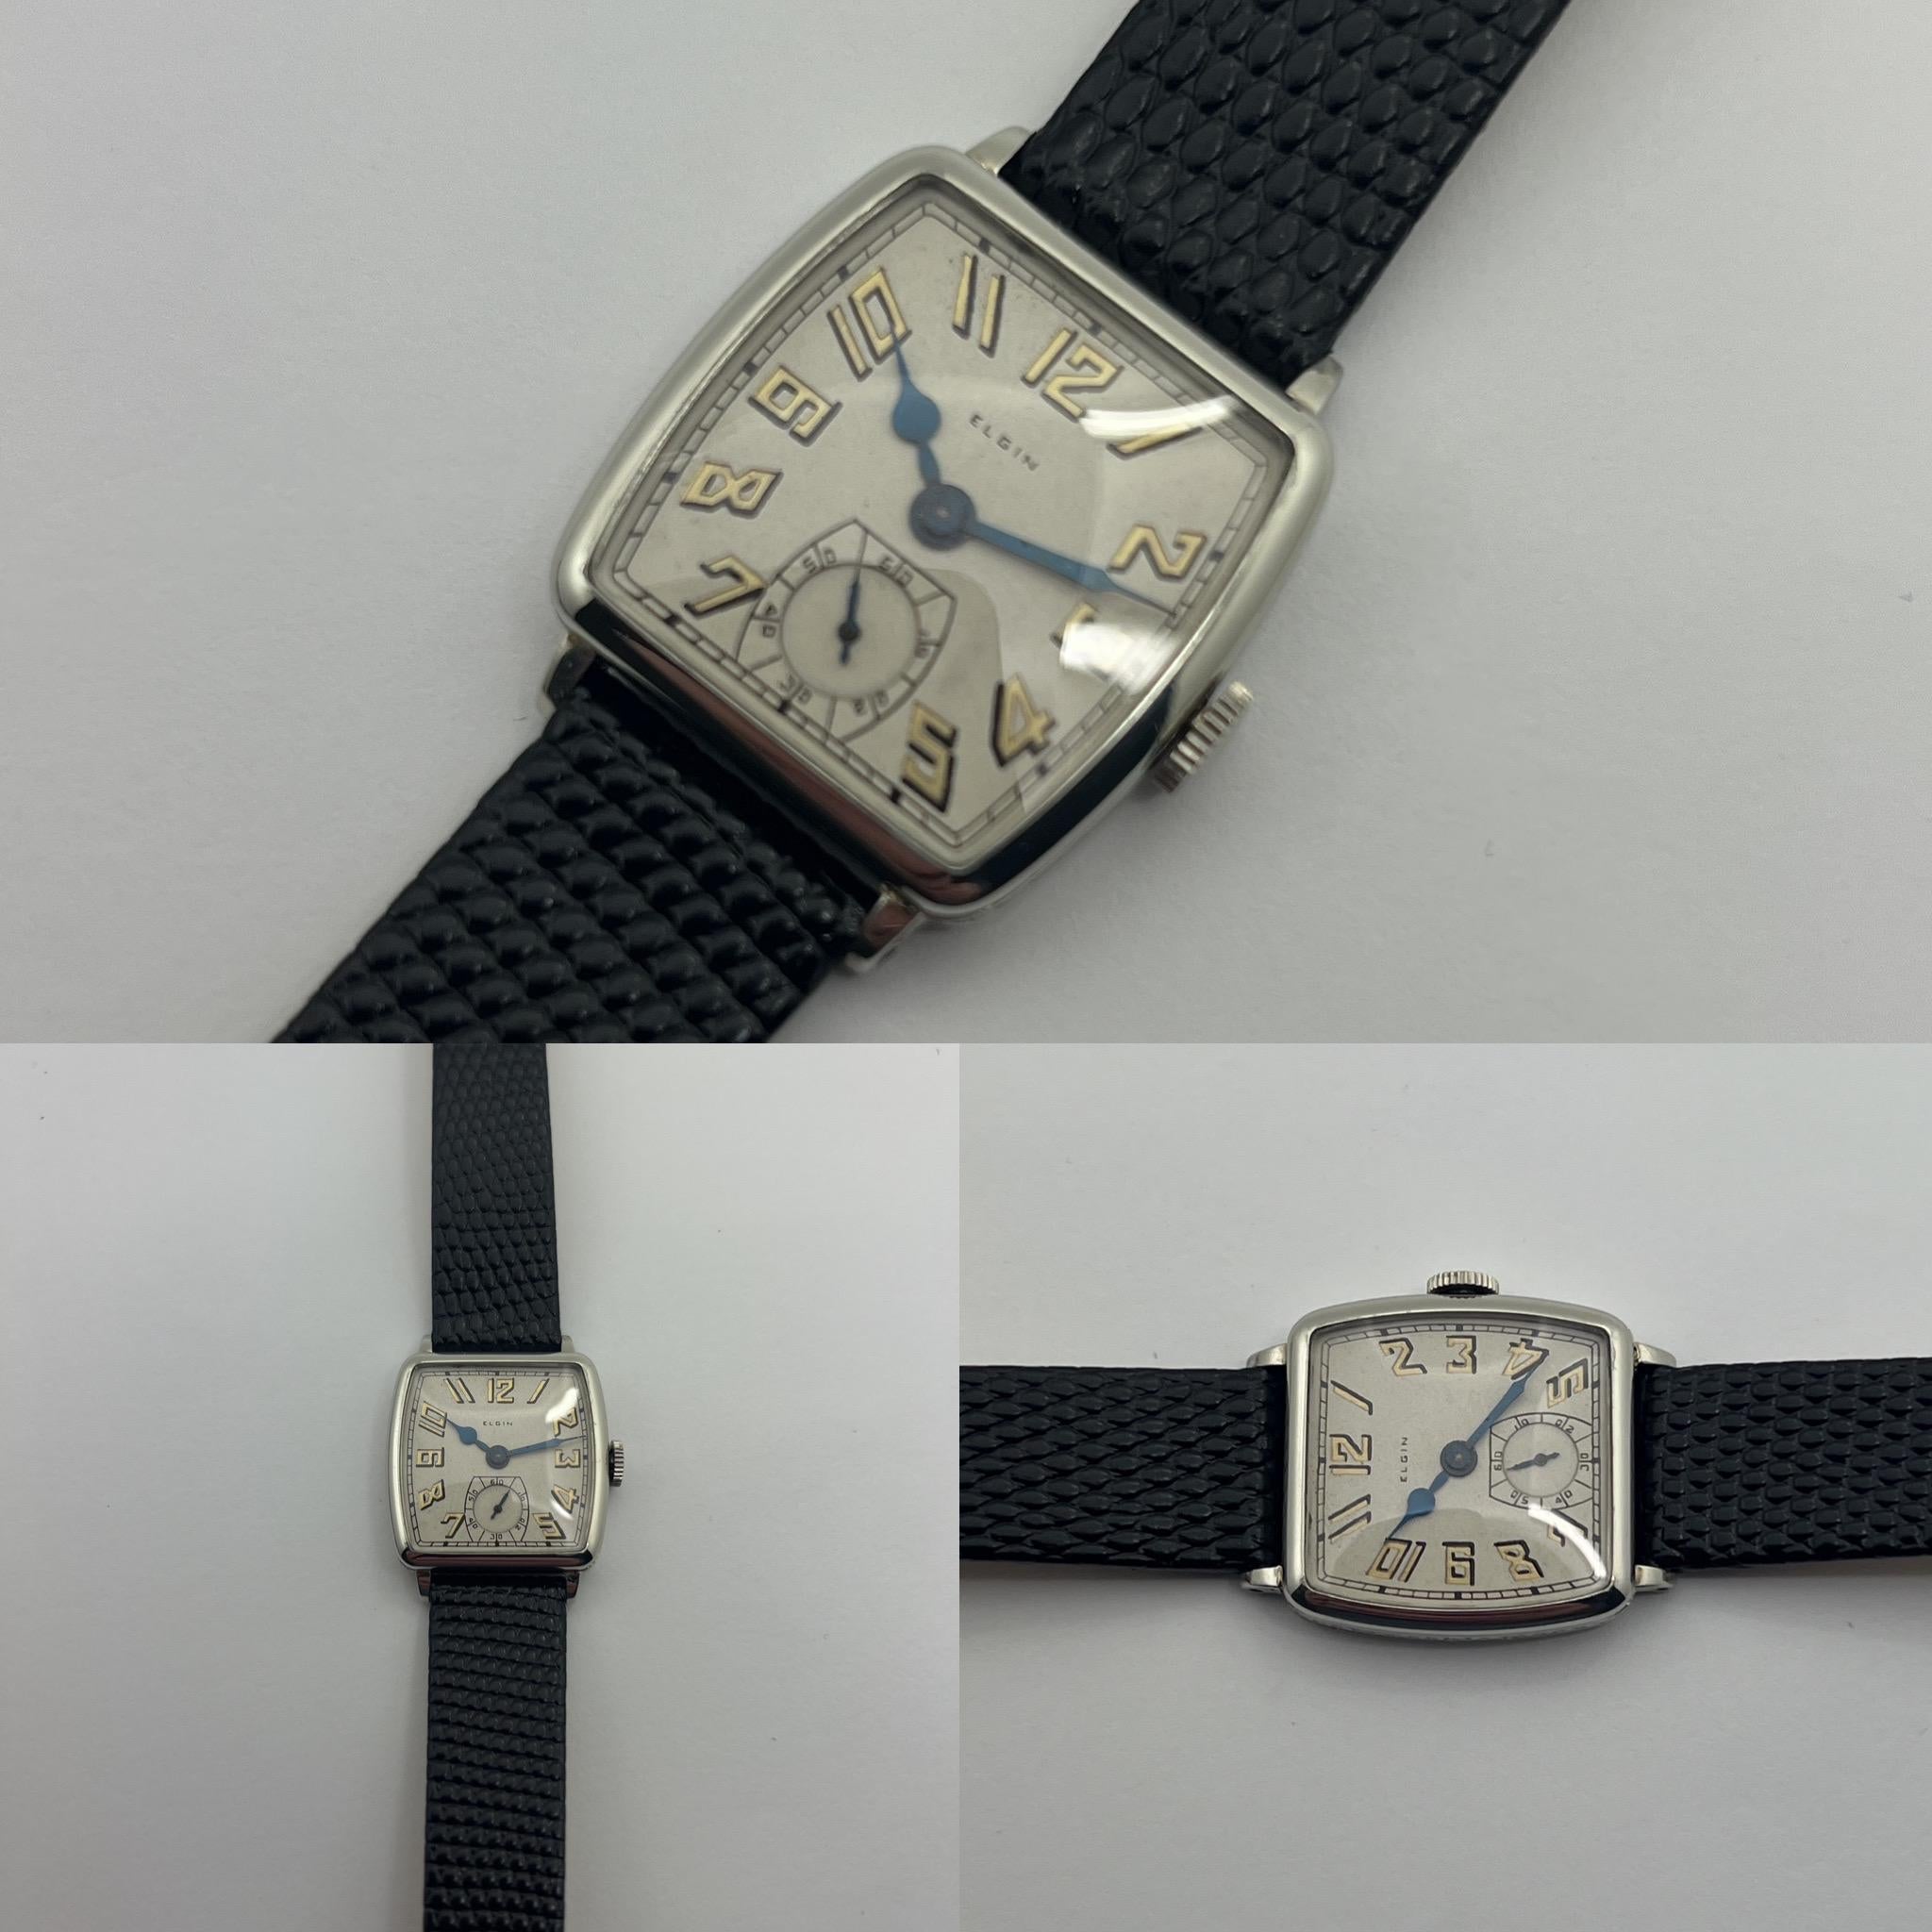 Thank you for dropping by. I have a sublime offering that is Art Deco through and through.  Elgin, one of the prolific early American wrist watch manufacturers. The played a significant role during the early wristwatch era. This is just an